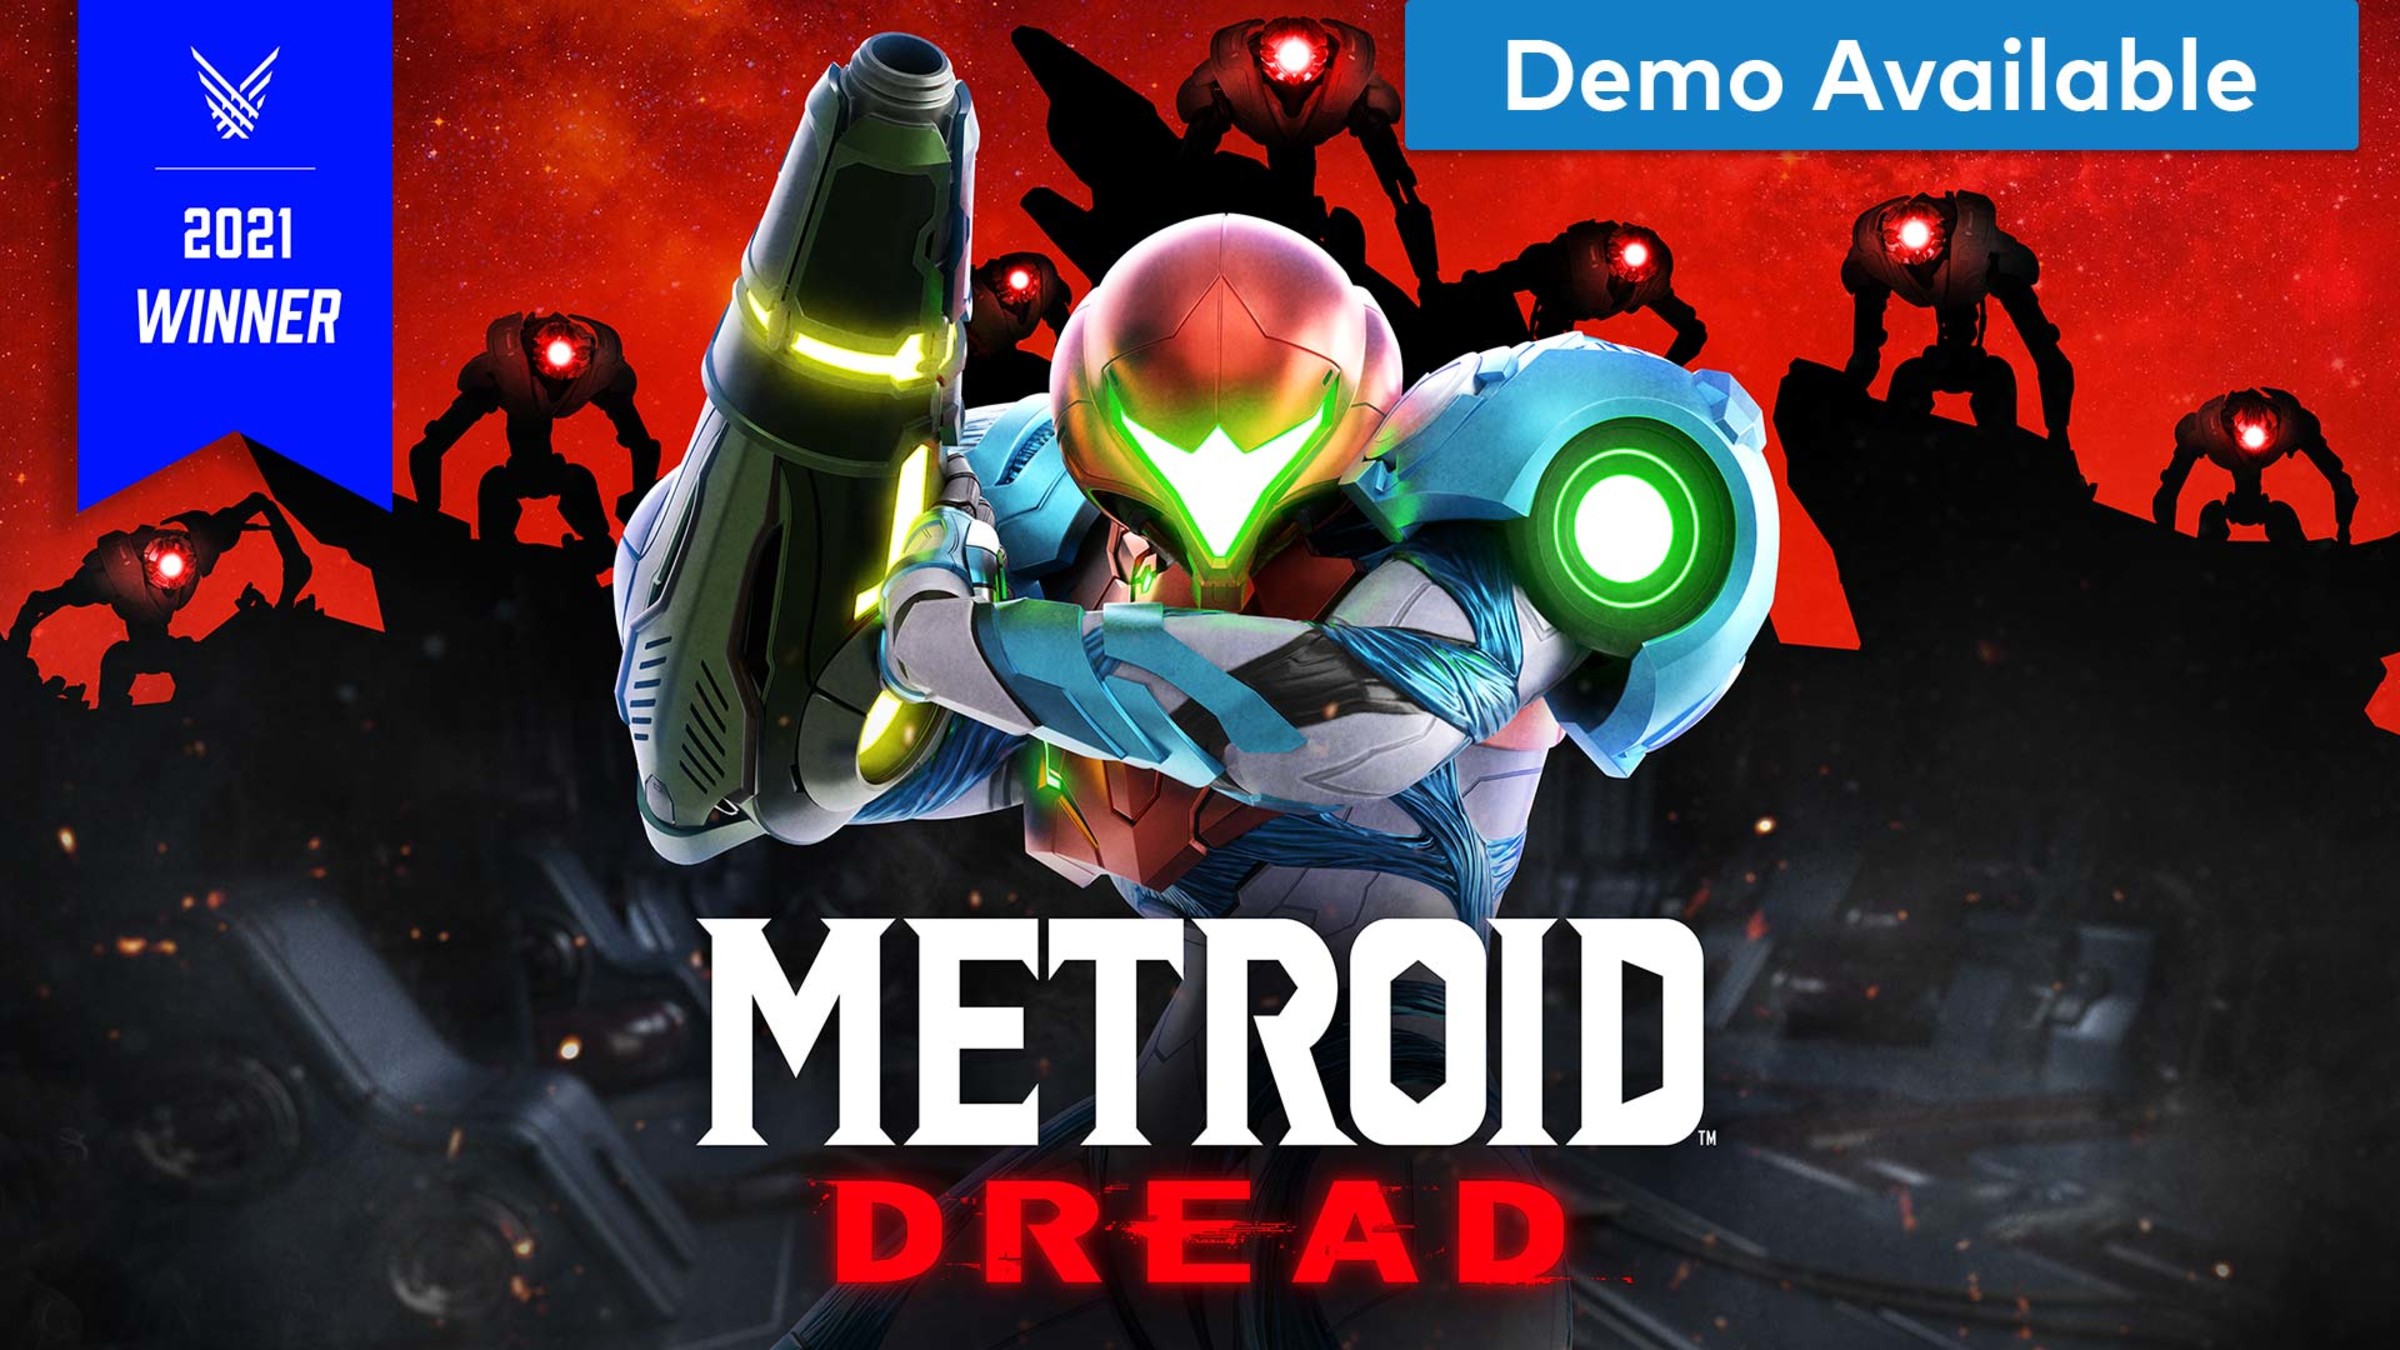 Metroid Dread is real, and it's coming to the Switch - The Verge